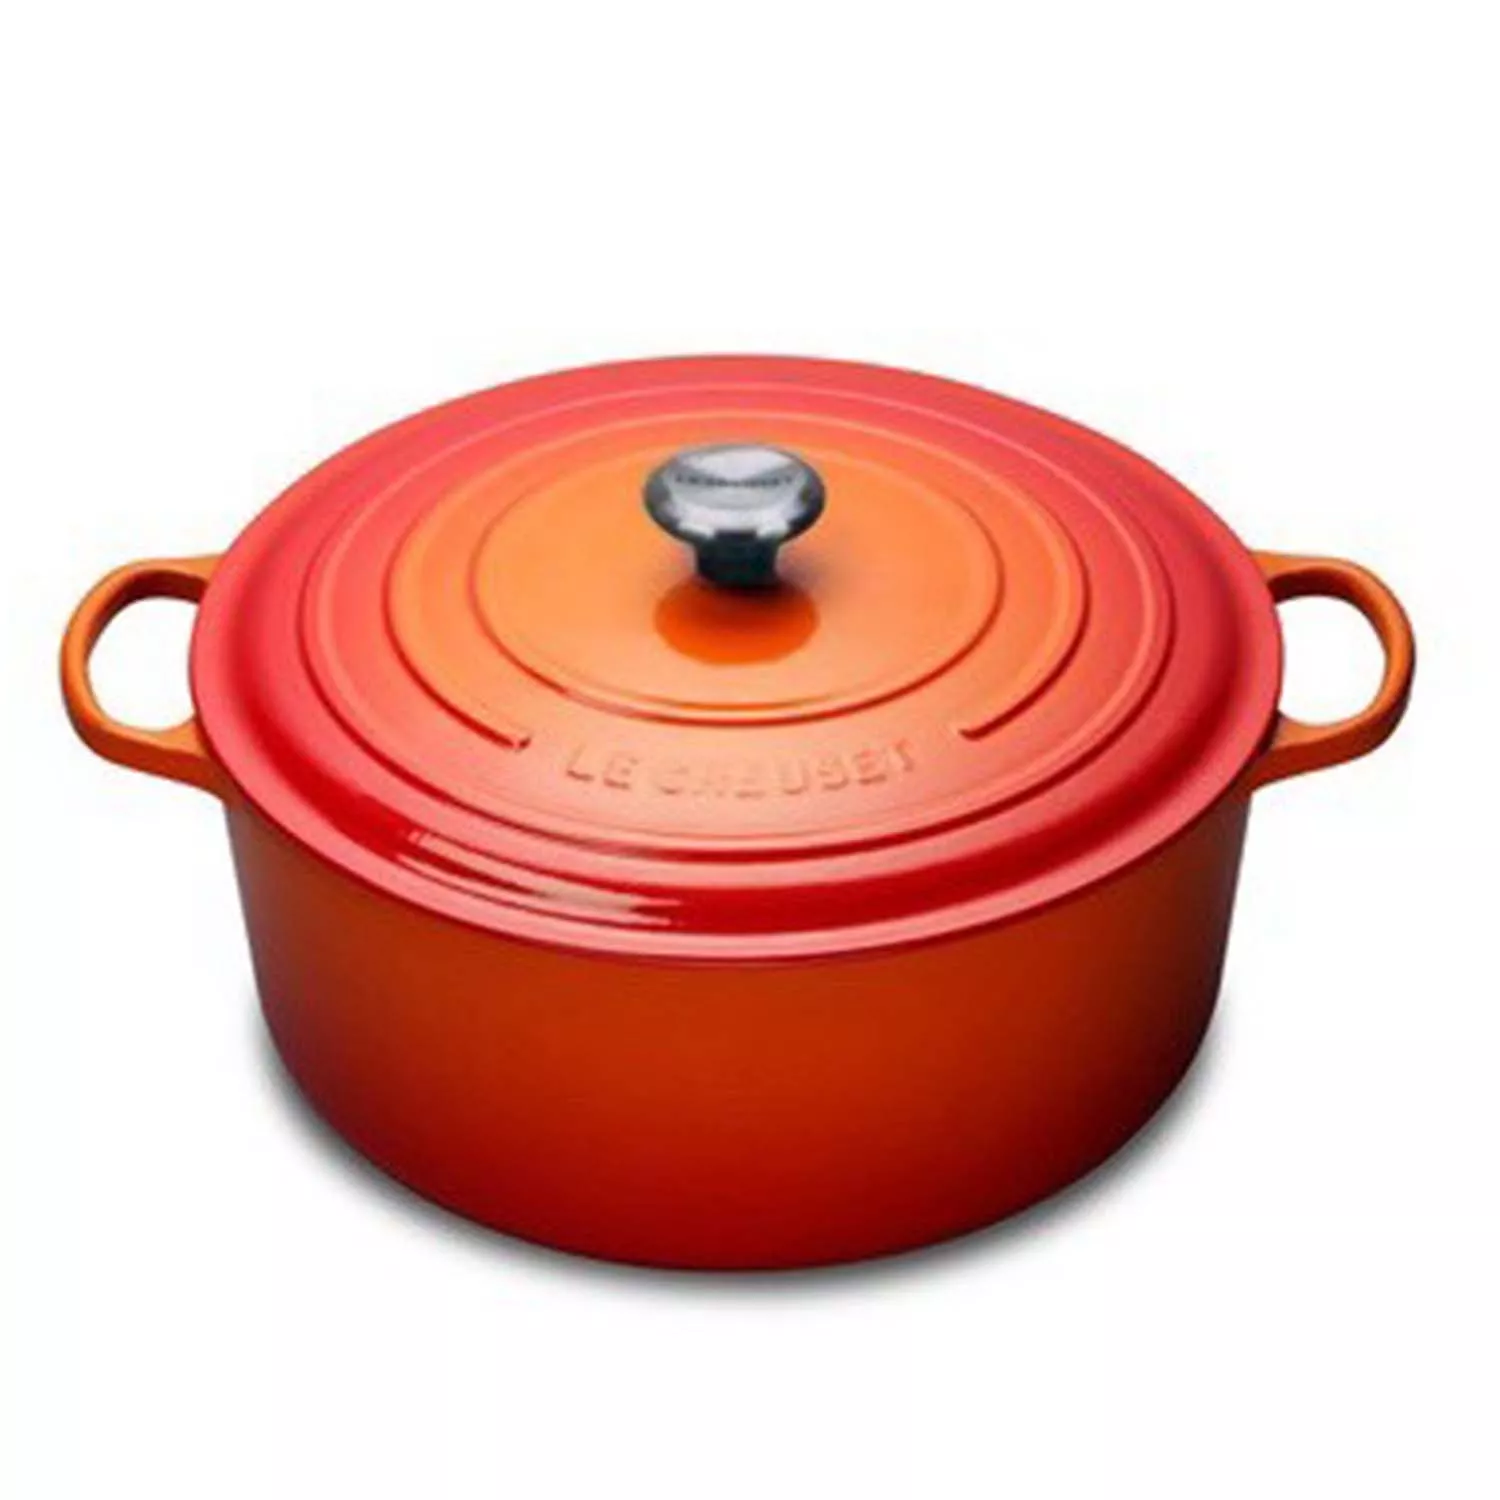 Le Creuset 13 1/4 Qt. Signature Round Dutch Oven w/Stainless Steel Kno –  Chef's Arsenal